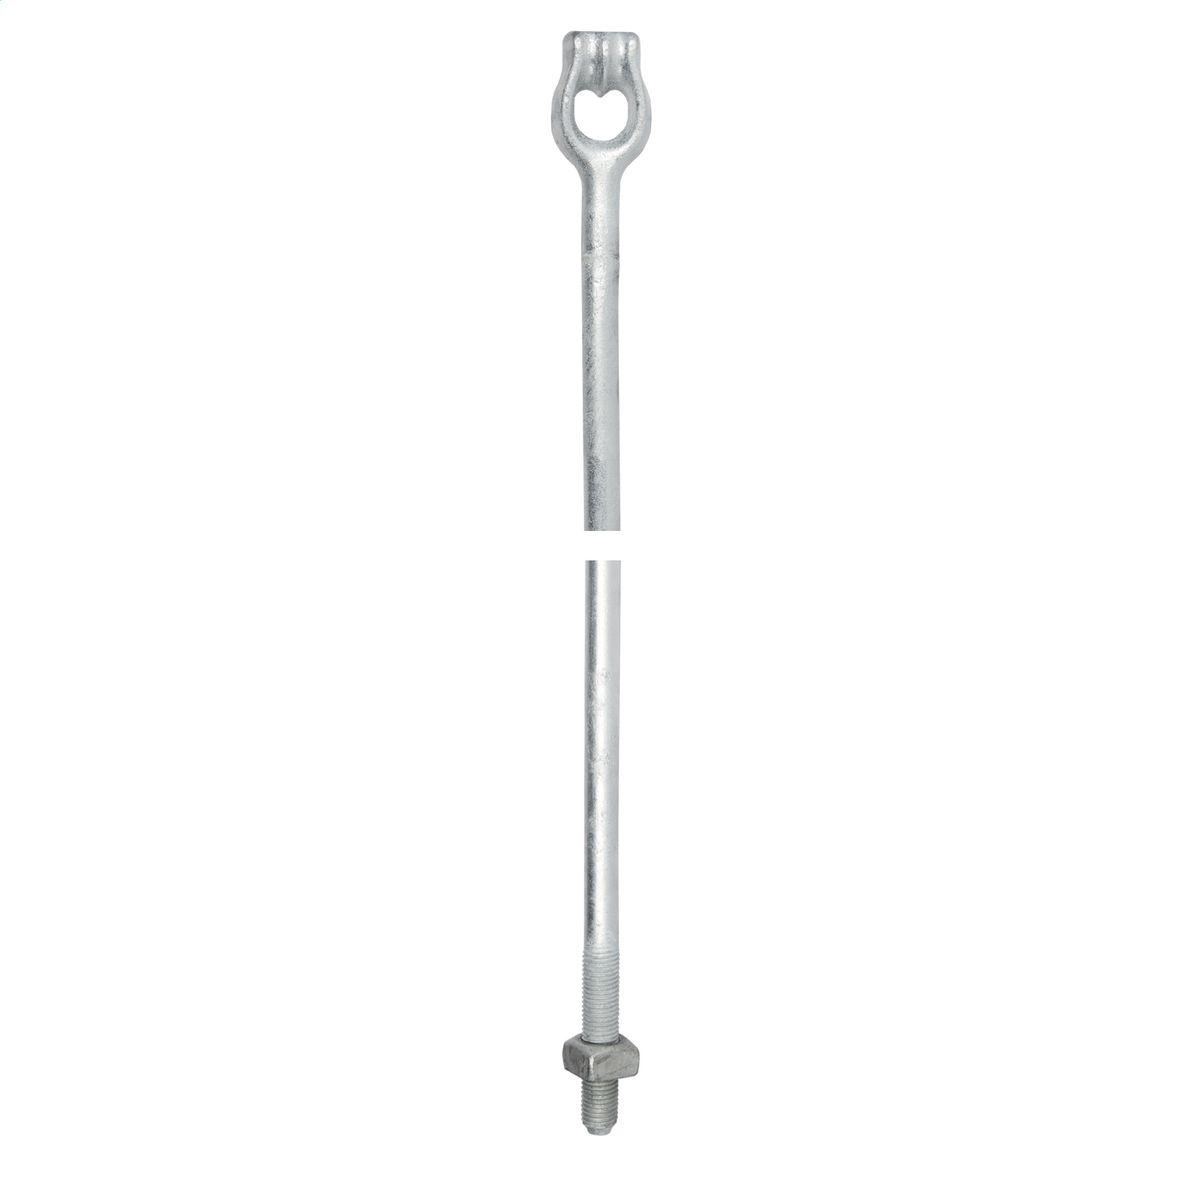 Hubbell 5347 Expanding/Cross-Plate Anchor Rod 0.625" (15.9 mm) Diameter Rod, 7' (2134 mm) long with Twineye.  ; Thimbleye®, Twineye® and Tripleye® drop forged eye distribute pulling stresses uniformly over individual strands of guy wire and keep the guy wire from spre